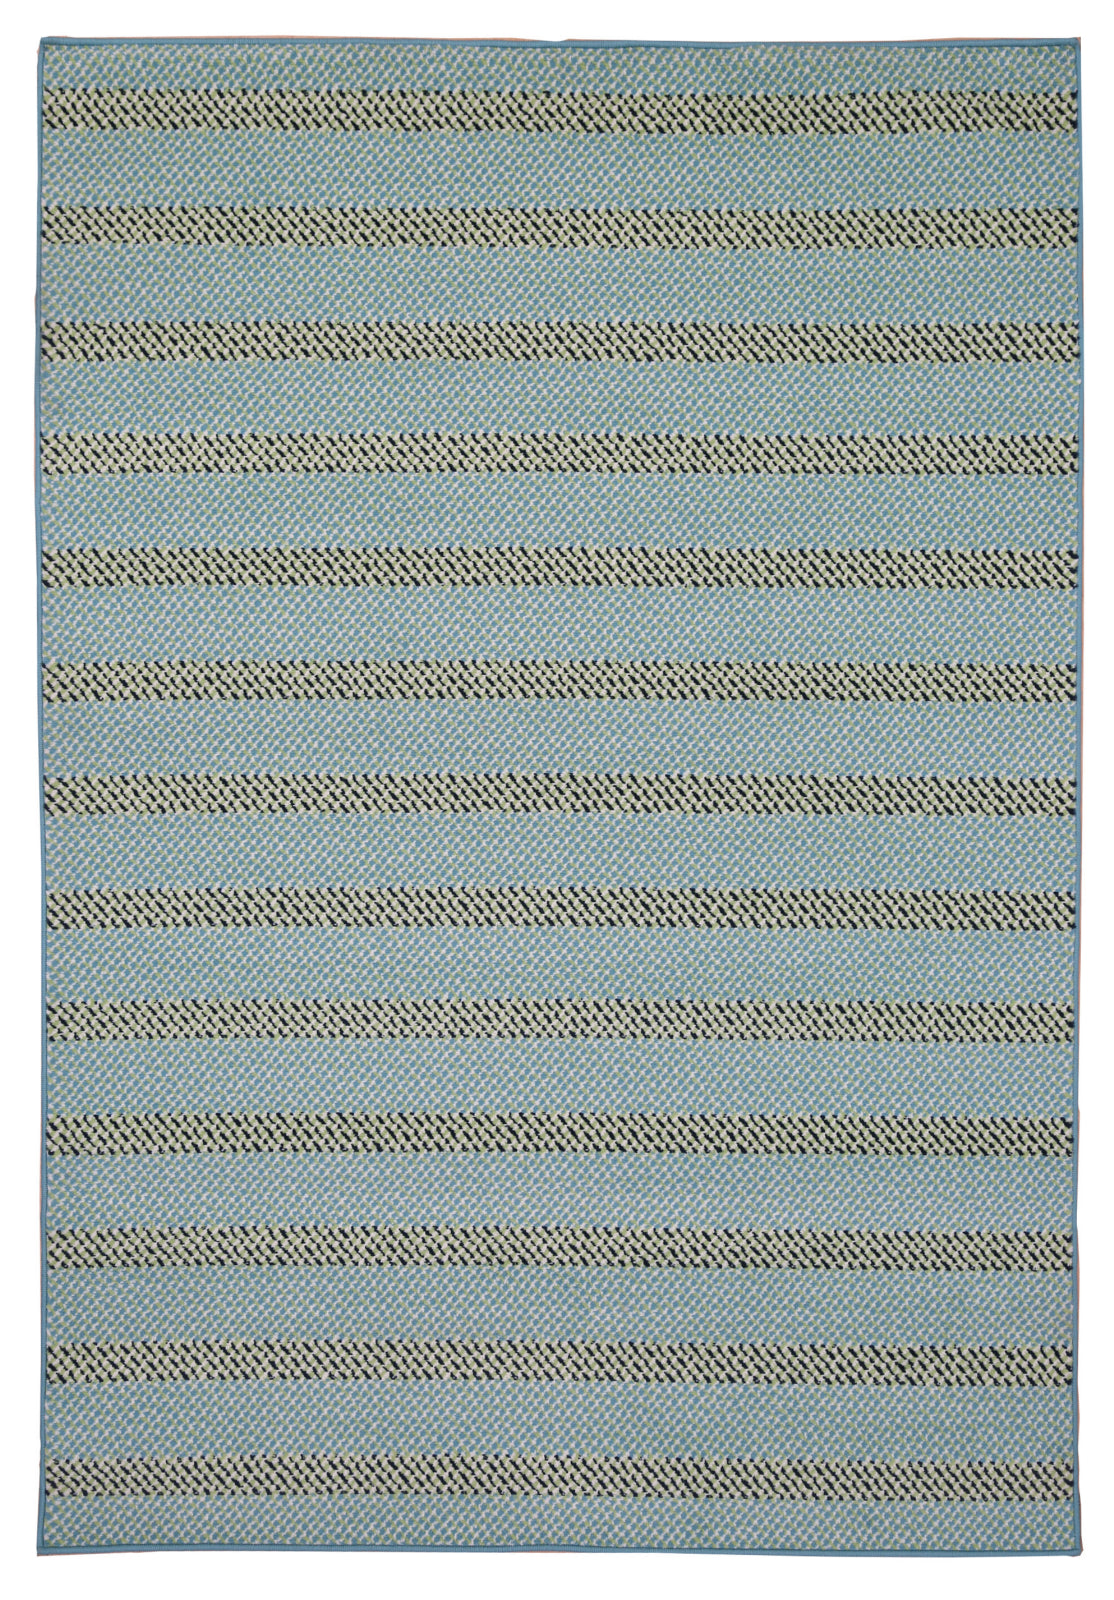 Rizzy Glendale GD7003 Area Rug main image